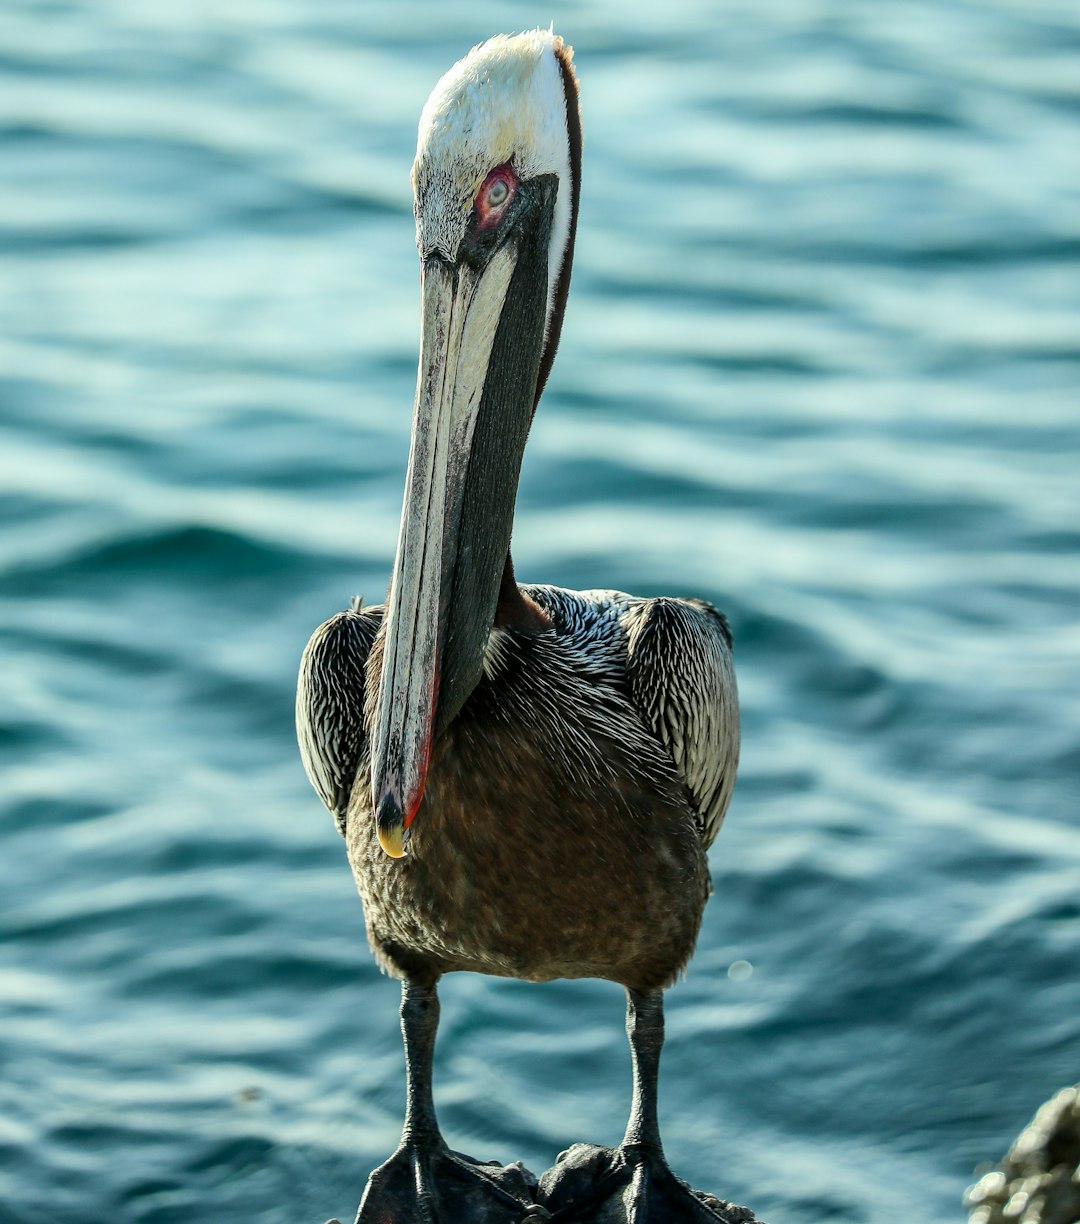 brown pelican on body of water during daytime